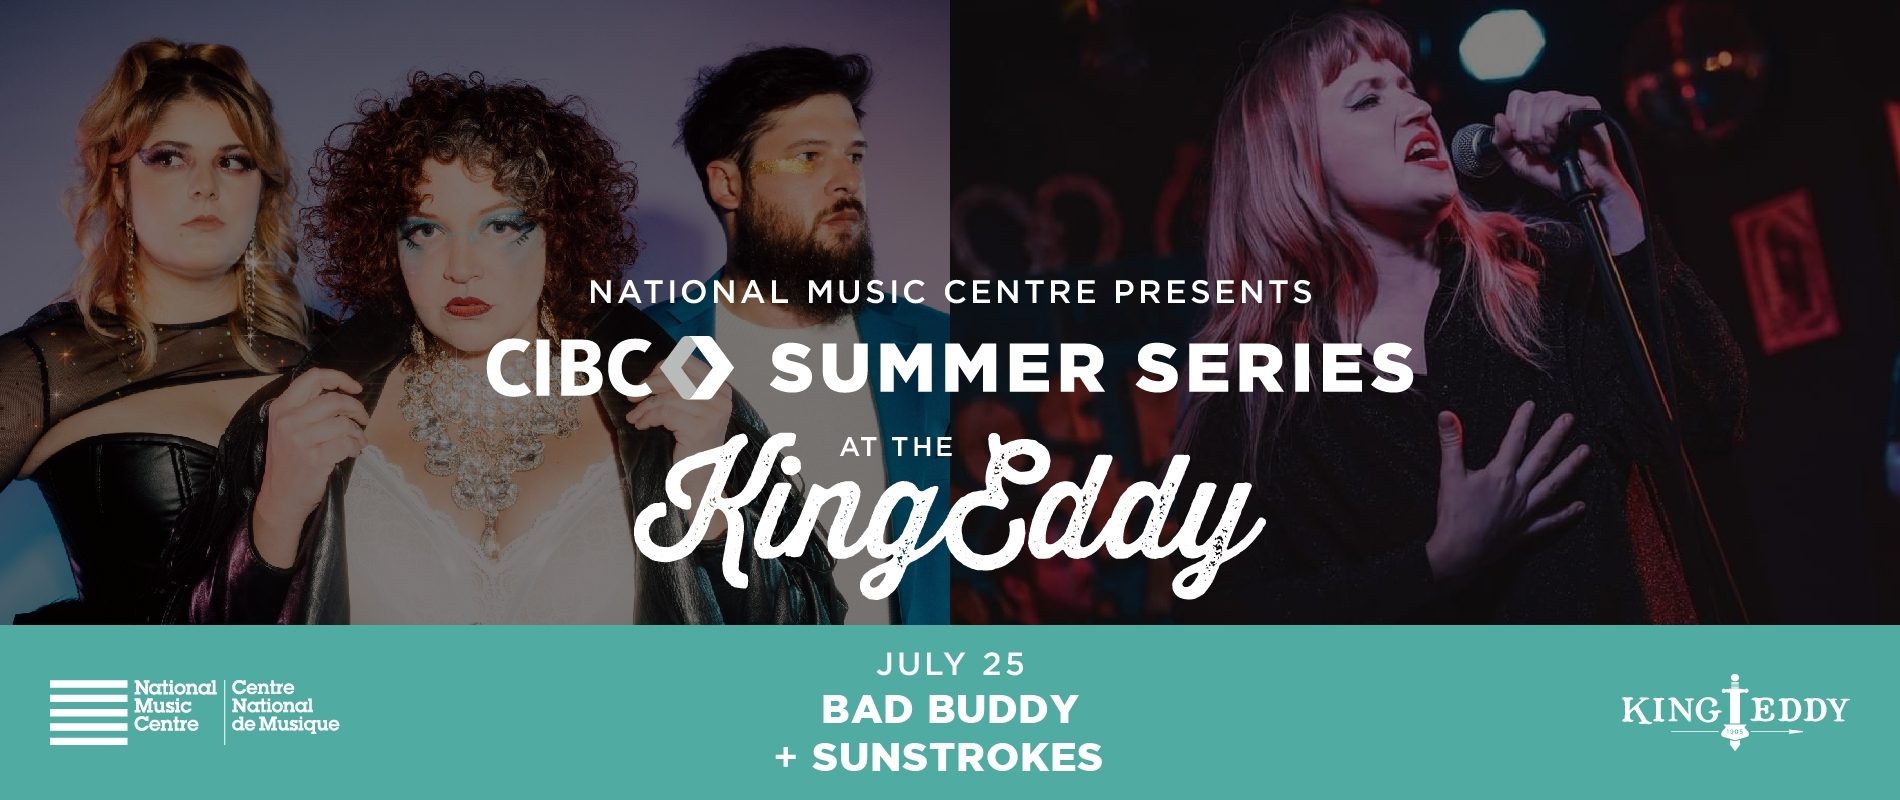 NMC Presents: CIBC Summer Series at the King Eddy — Bad Buddy with Sunstrokes